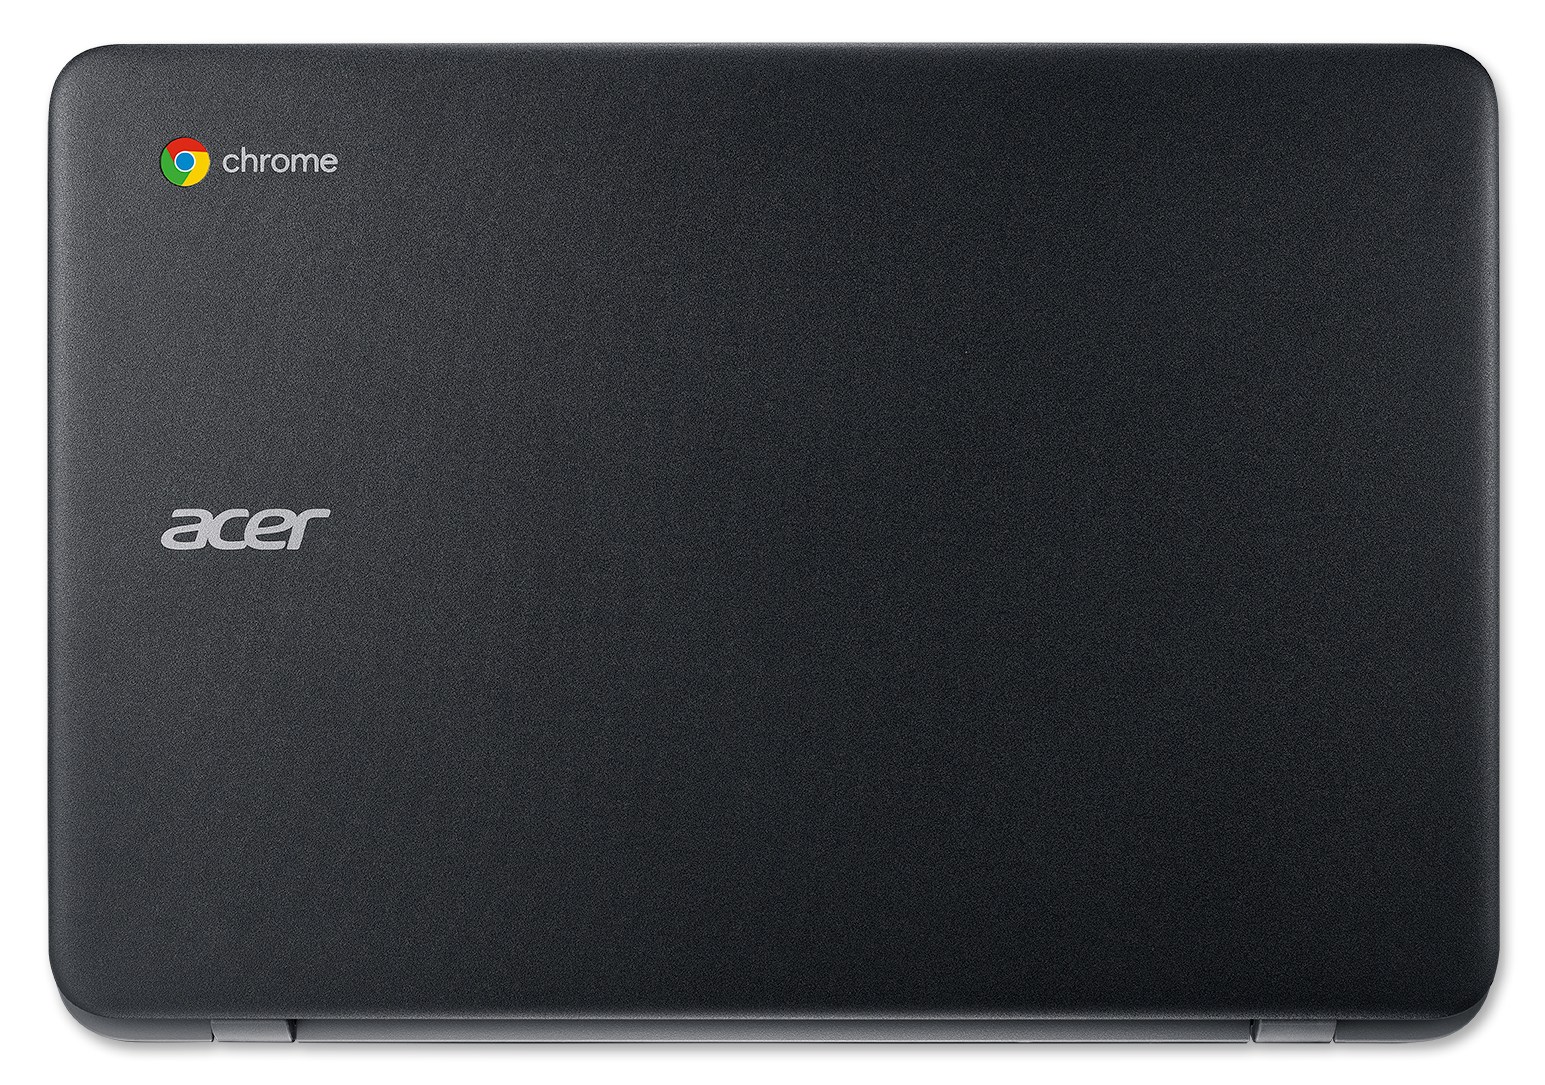 Acer’s new Chromebook 11 C732 launched at $279